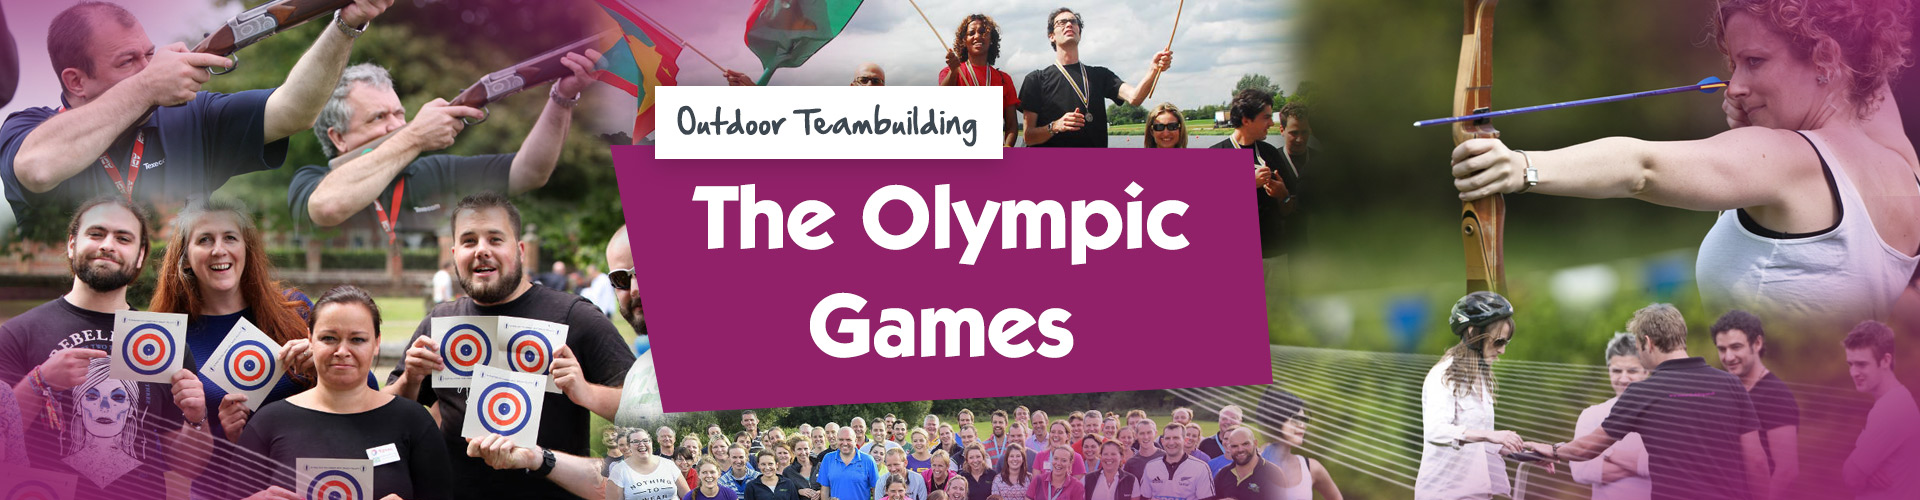 Teambuilding | The Olympic Games